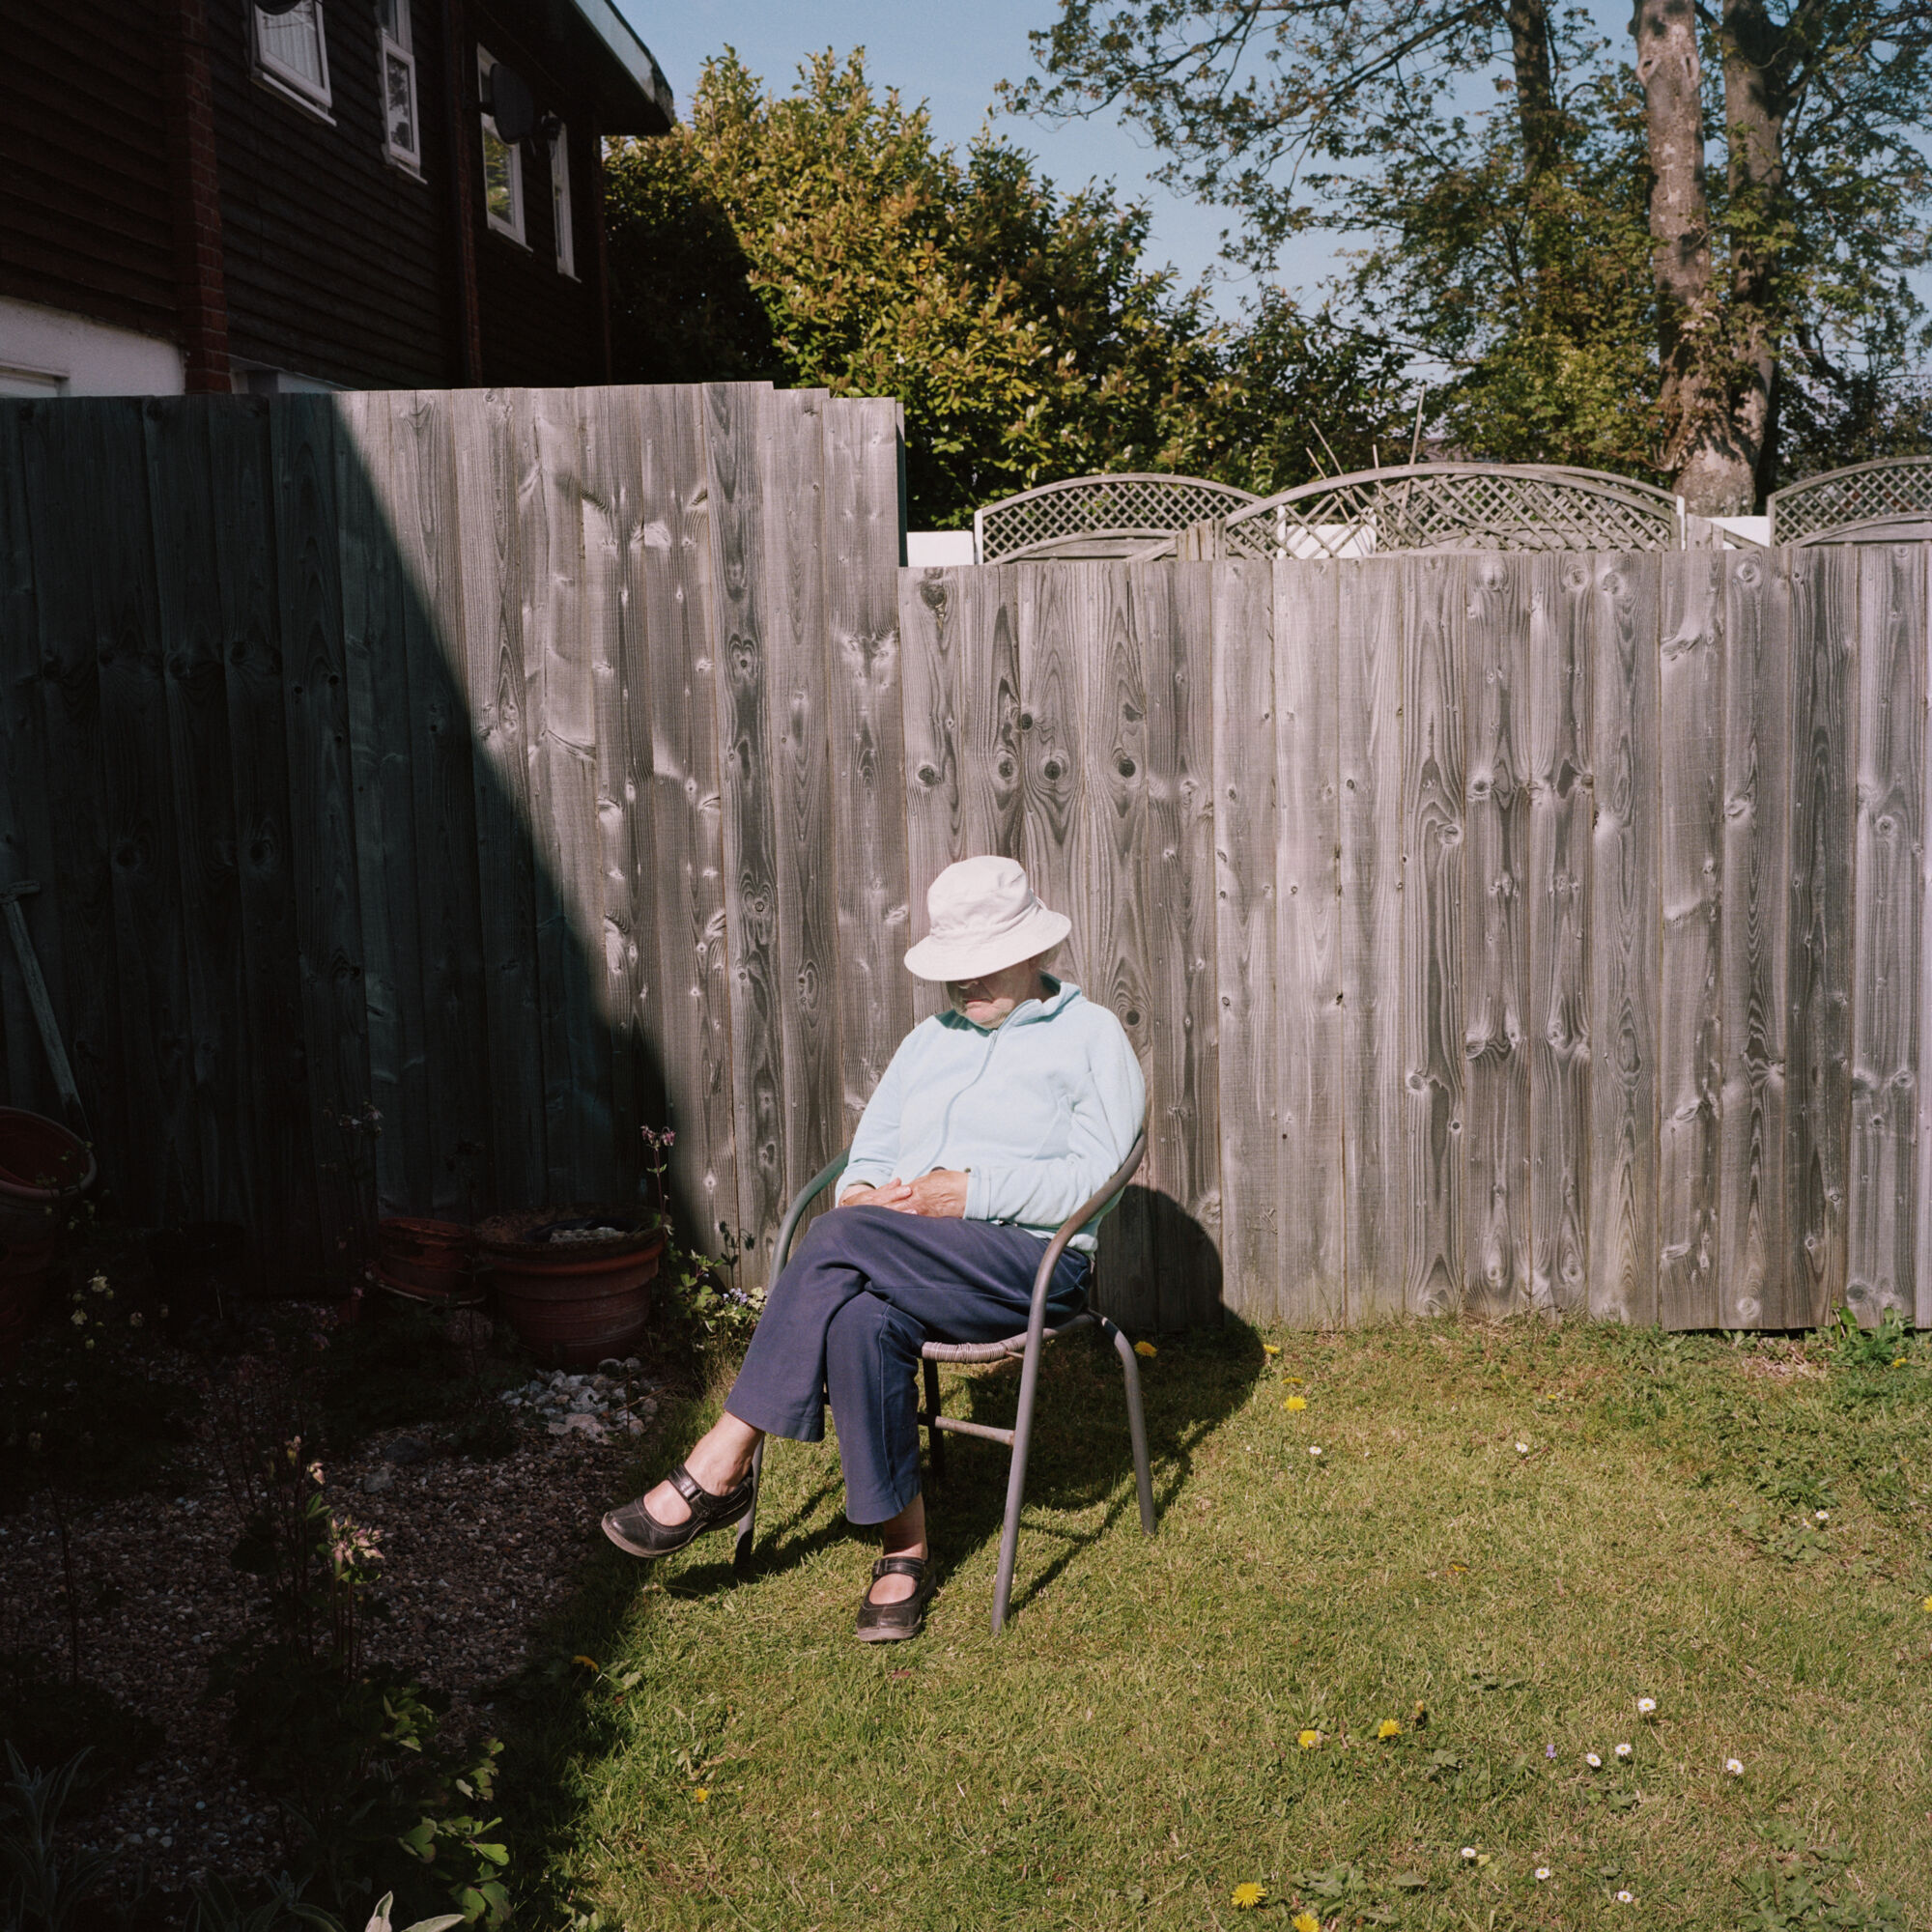 The Wick - Laundry Day #2, July 2021 
From the series Laundry Day by Clémentine Schneidermann © Clémentine Schneidermann